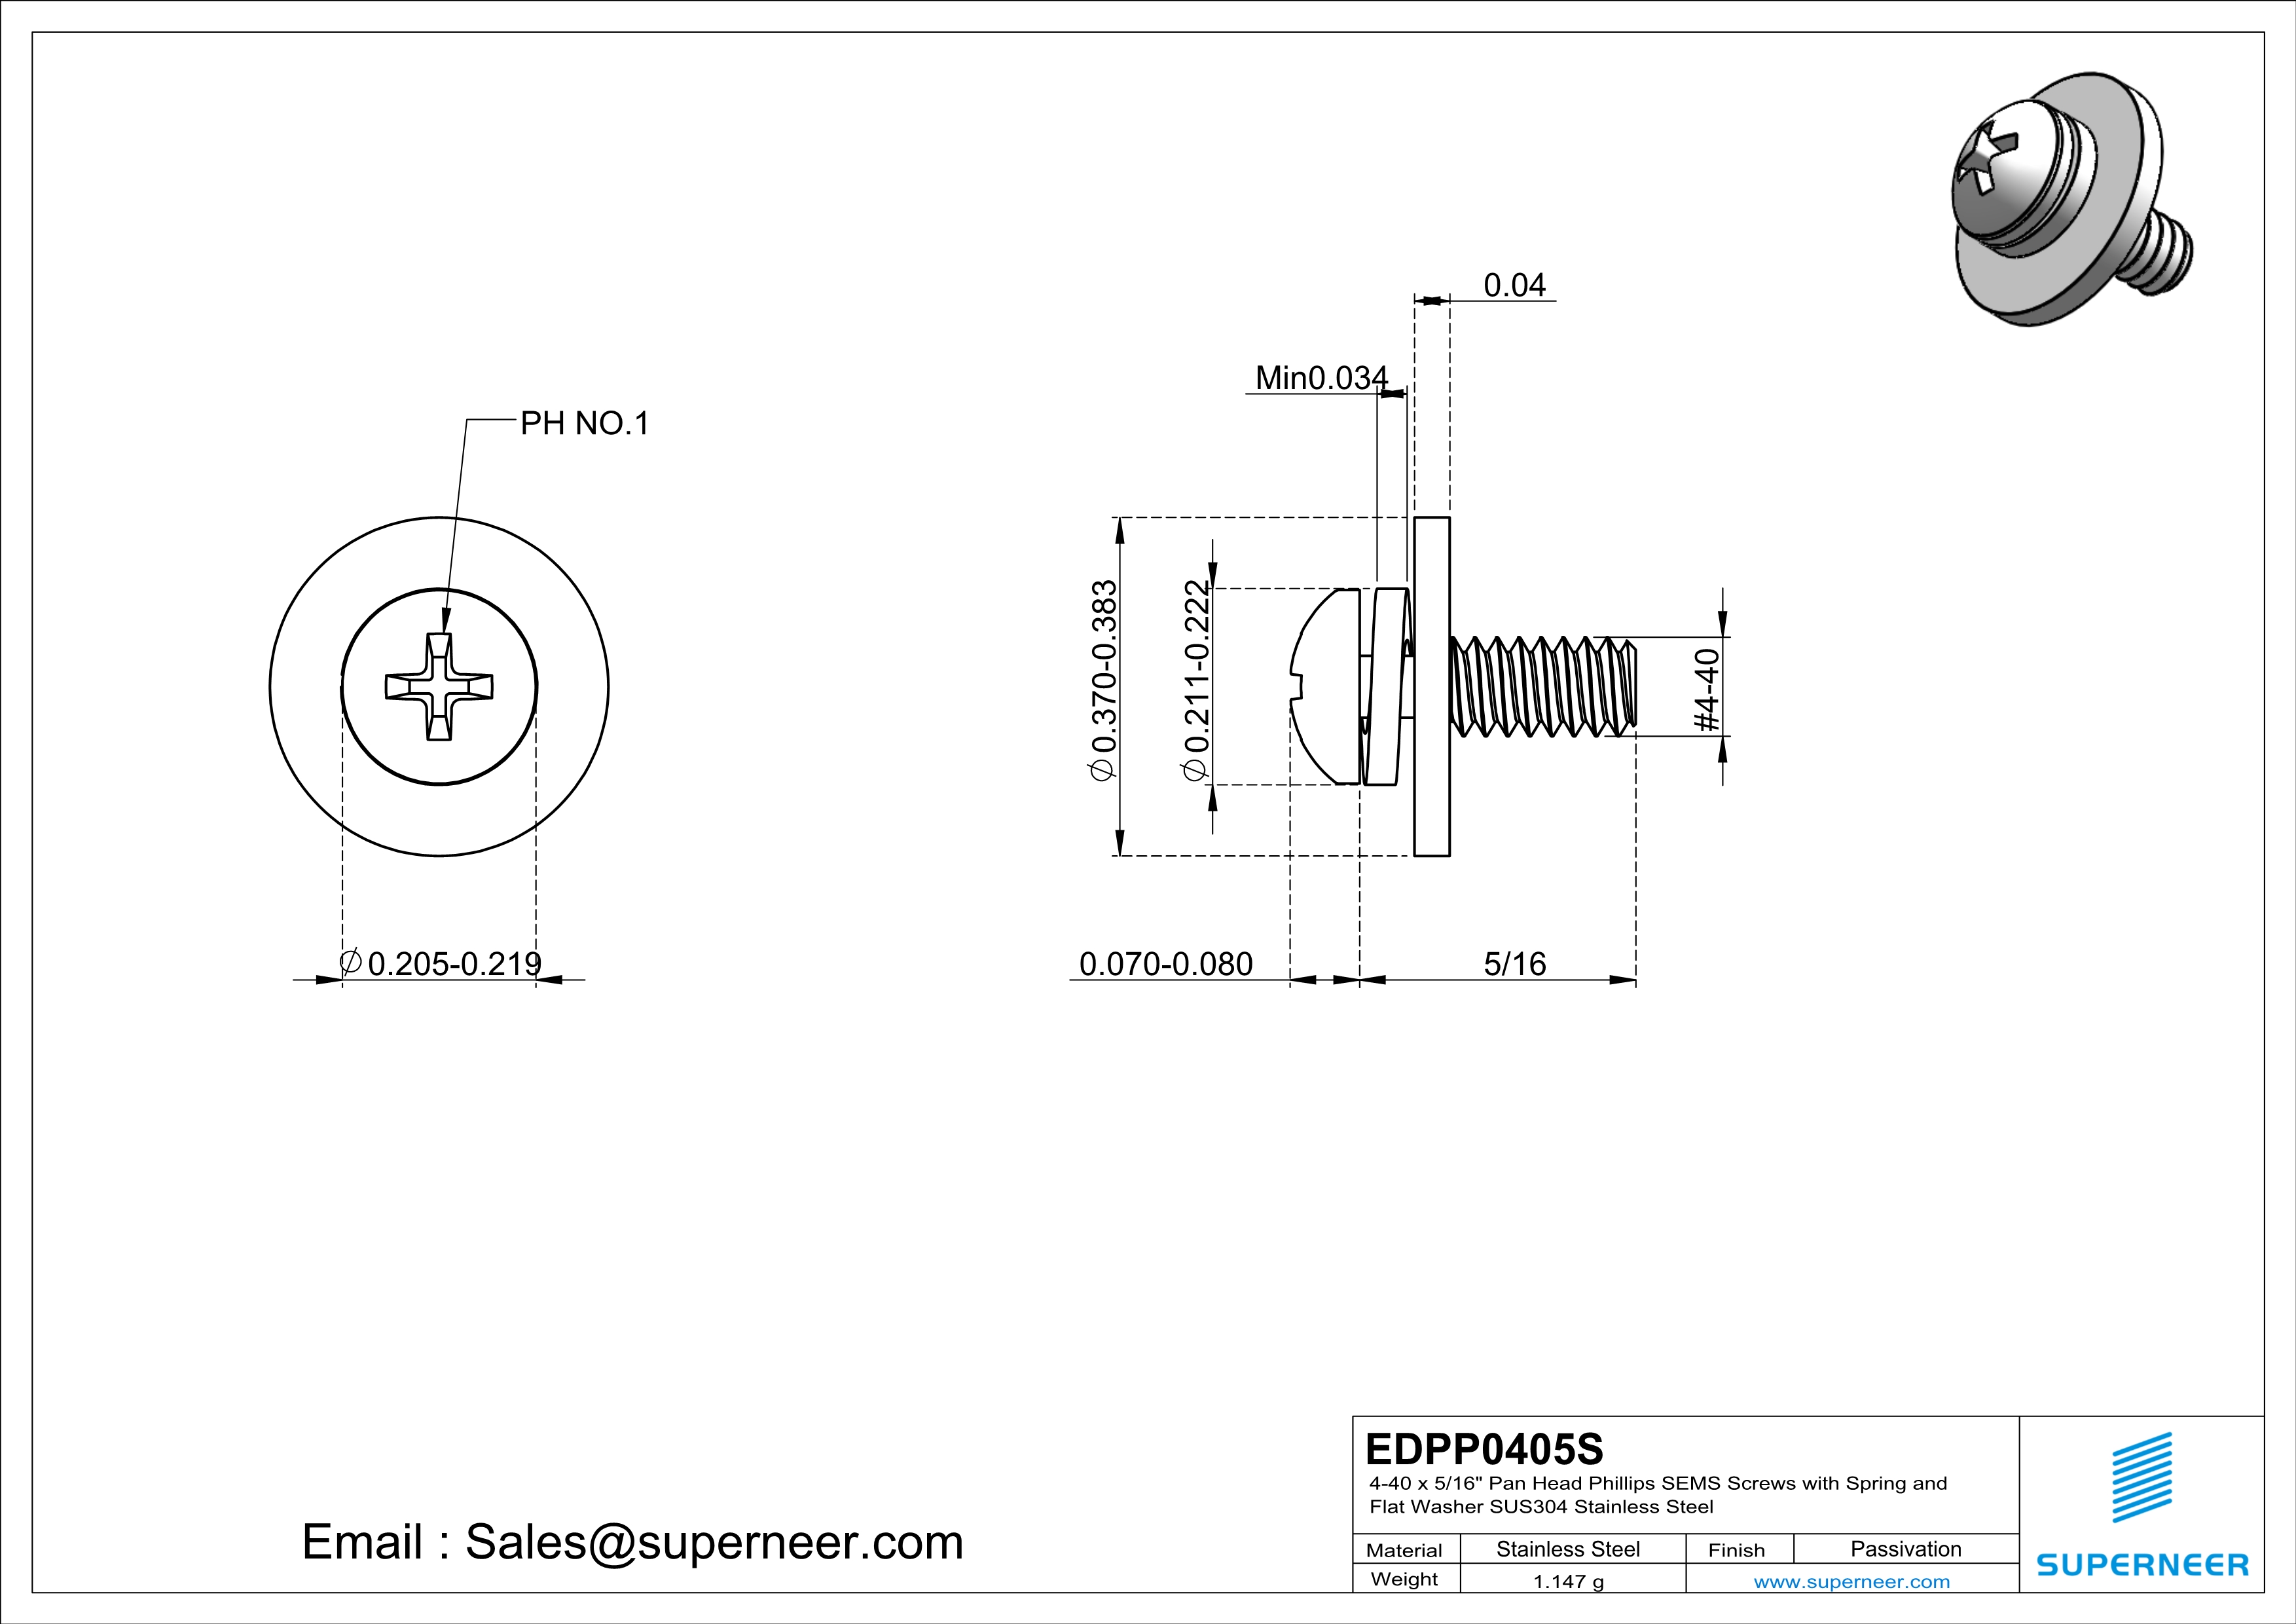 4-40 x 5/16" Pan Head Phillips SEMS Screws with Spring and Flat Washer SUS304 Stainless Steel Inox